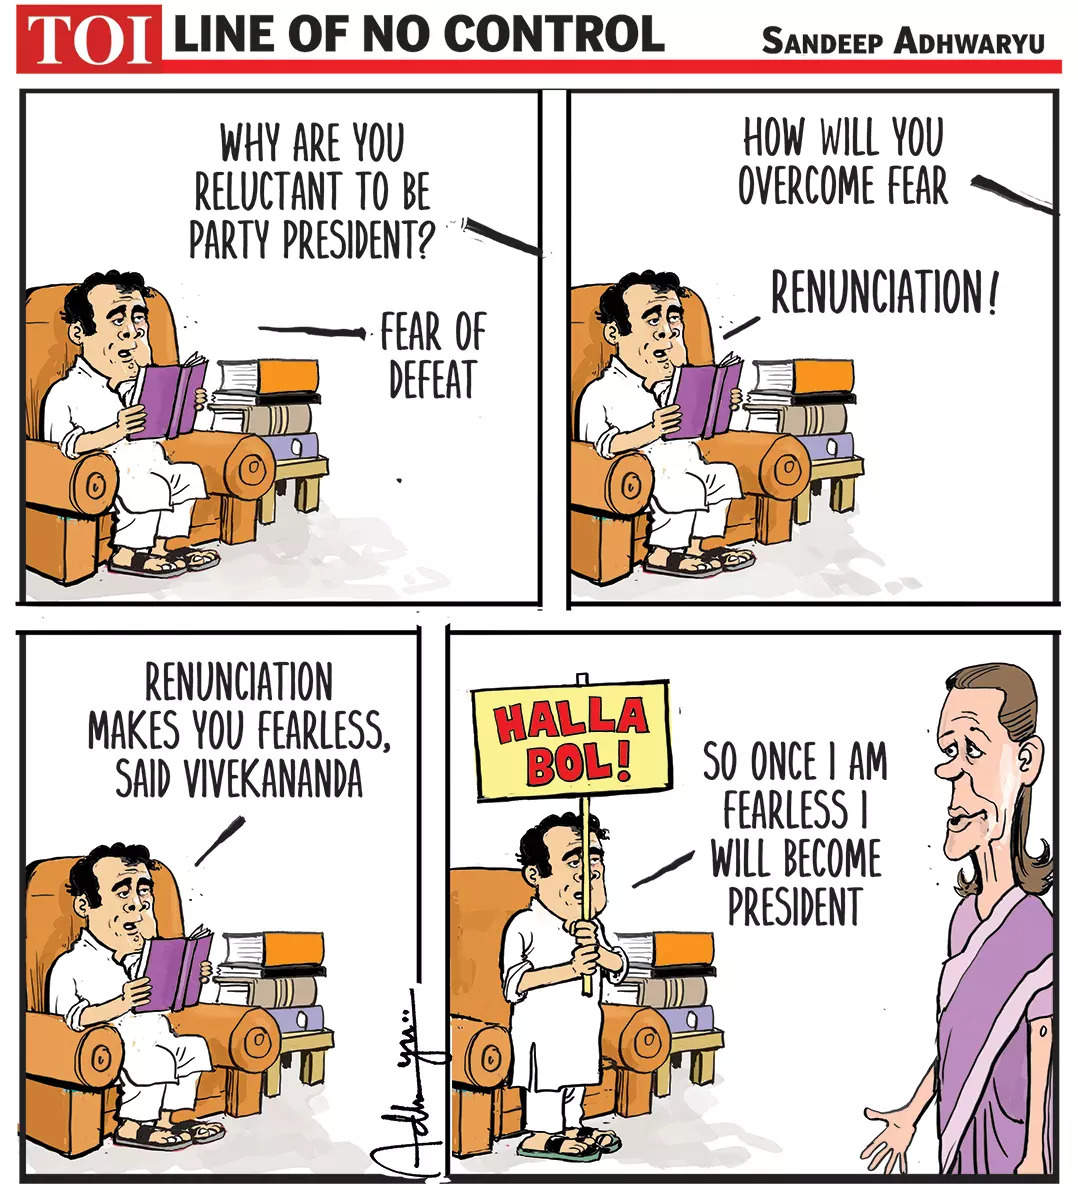 Congress President | Times of India Mobile